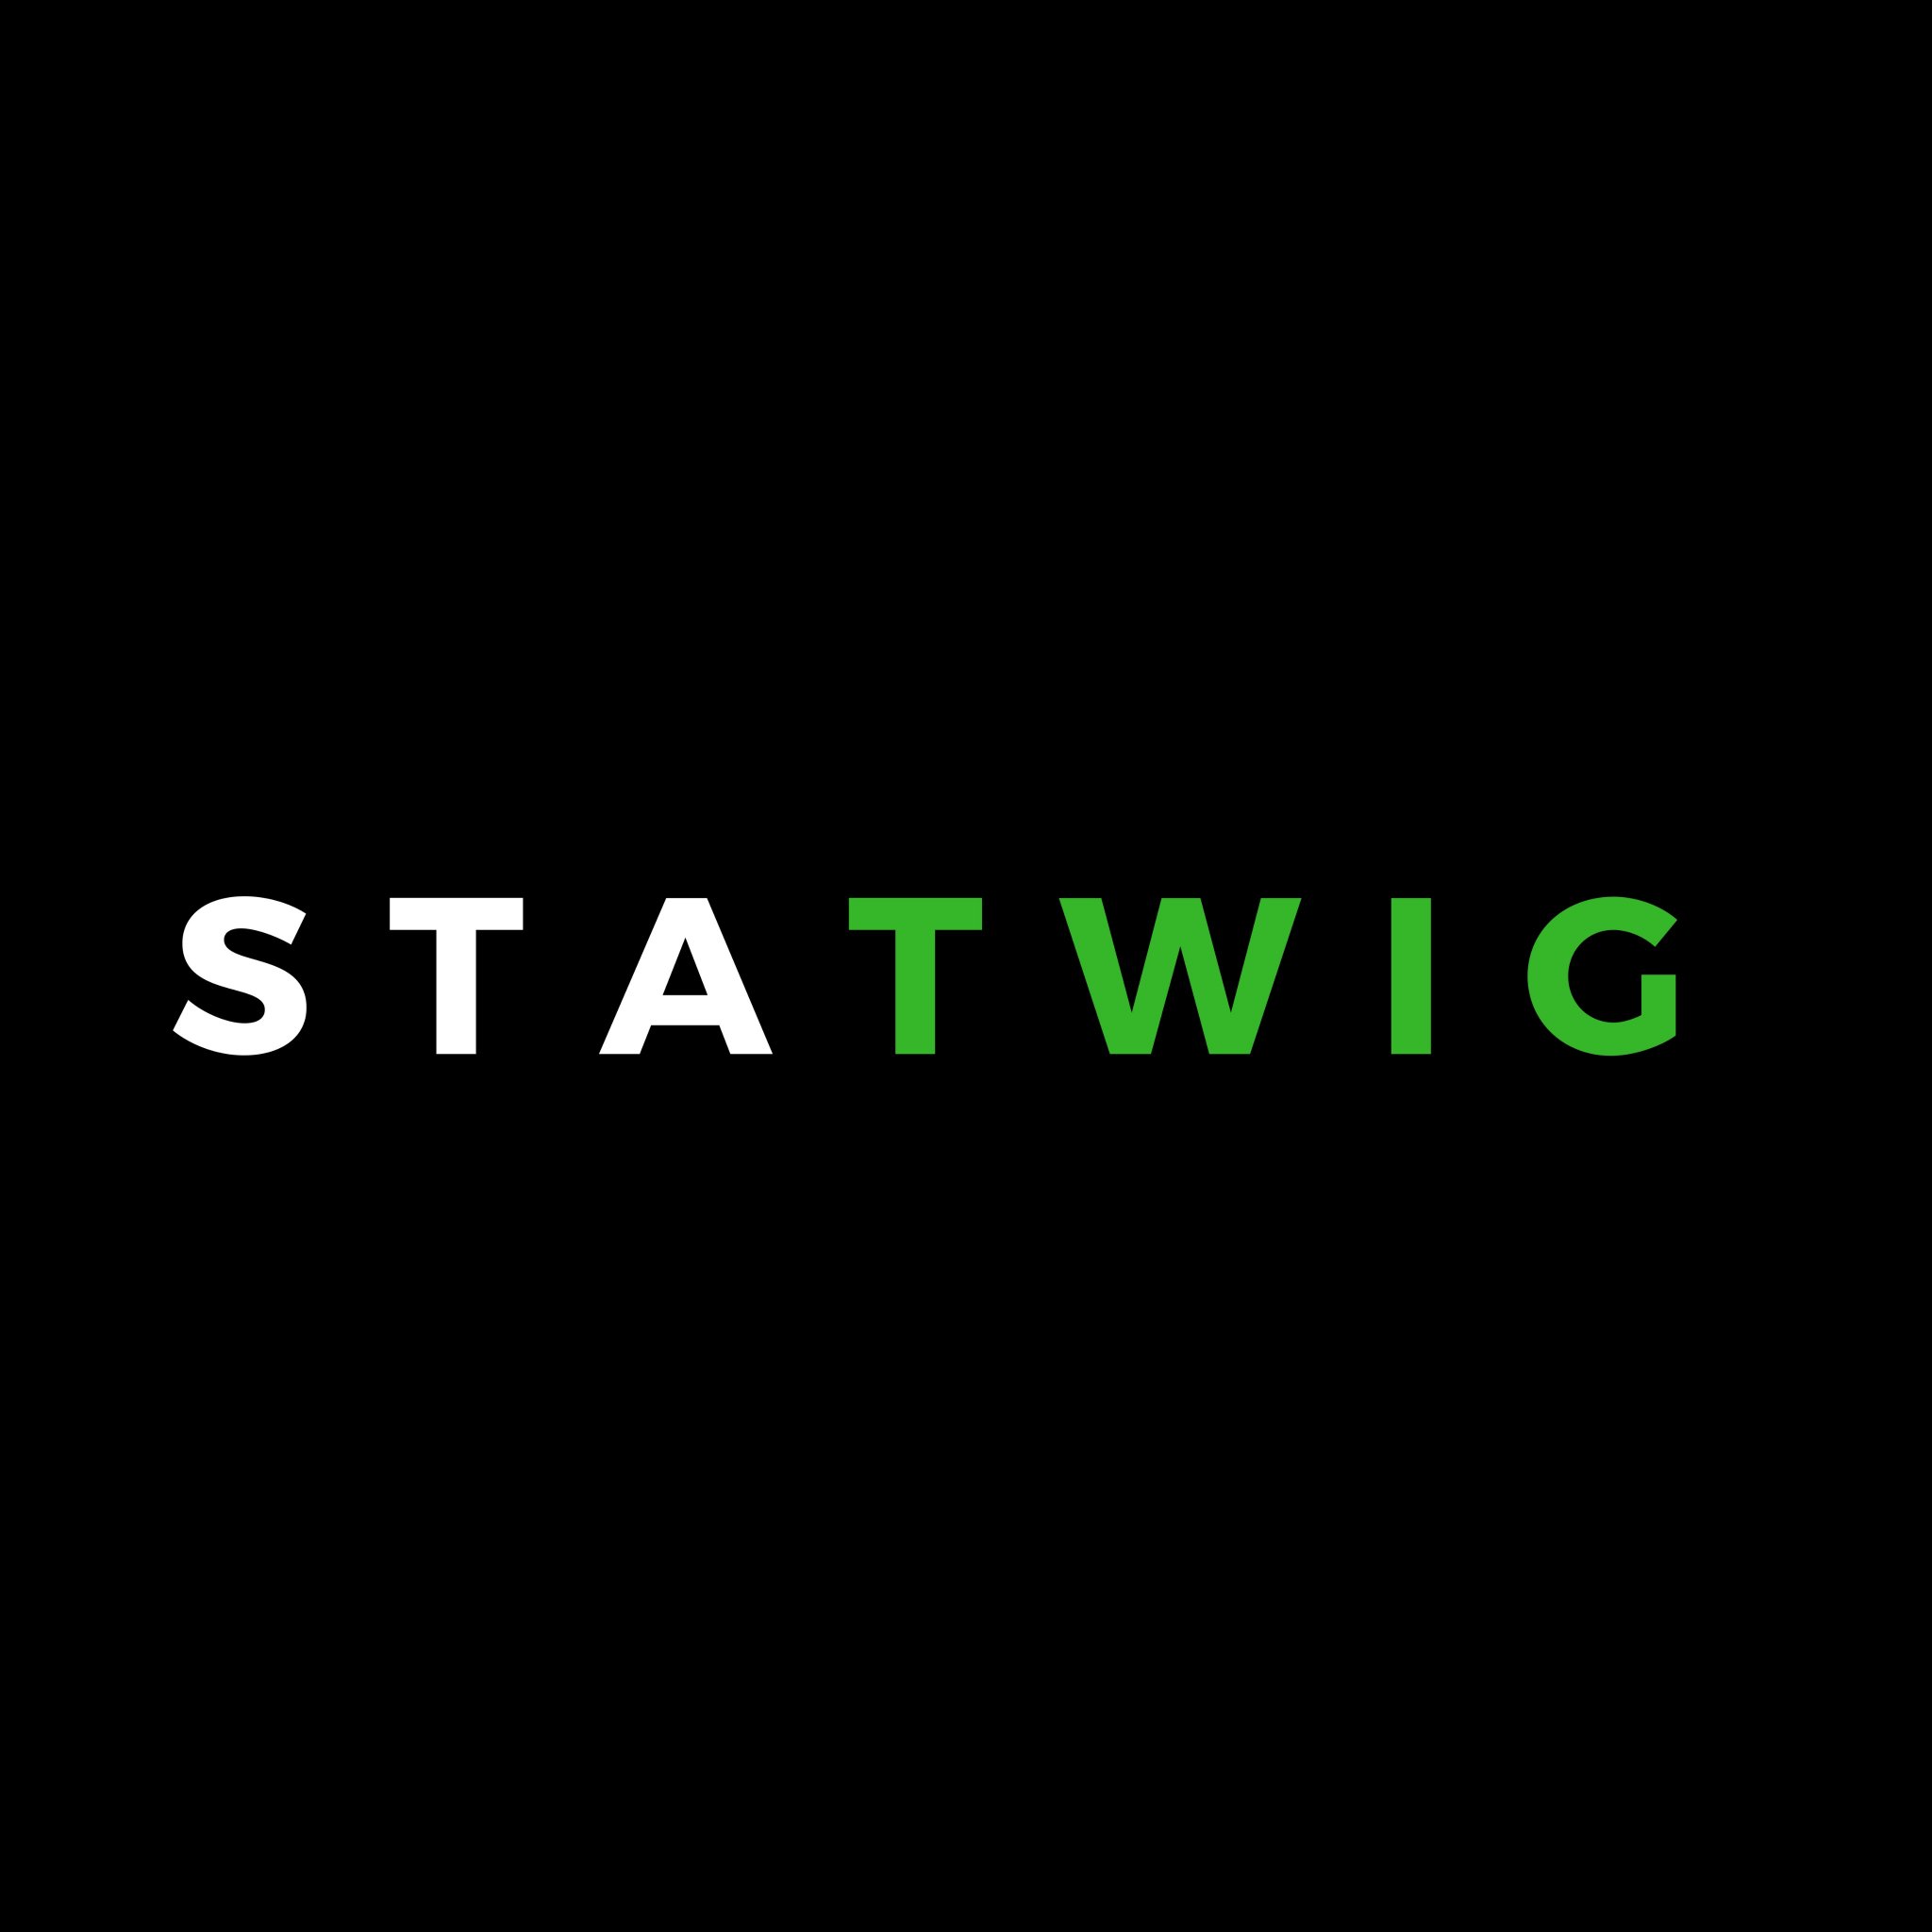 StaTwig is improving transparency, reducing waste, and building trust in supply chains for critical products such as food and vaccines